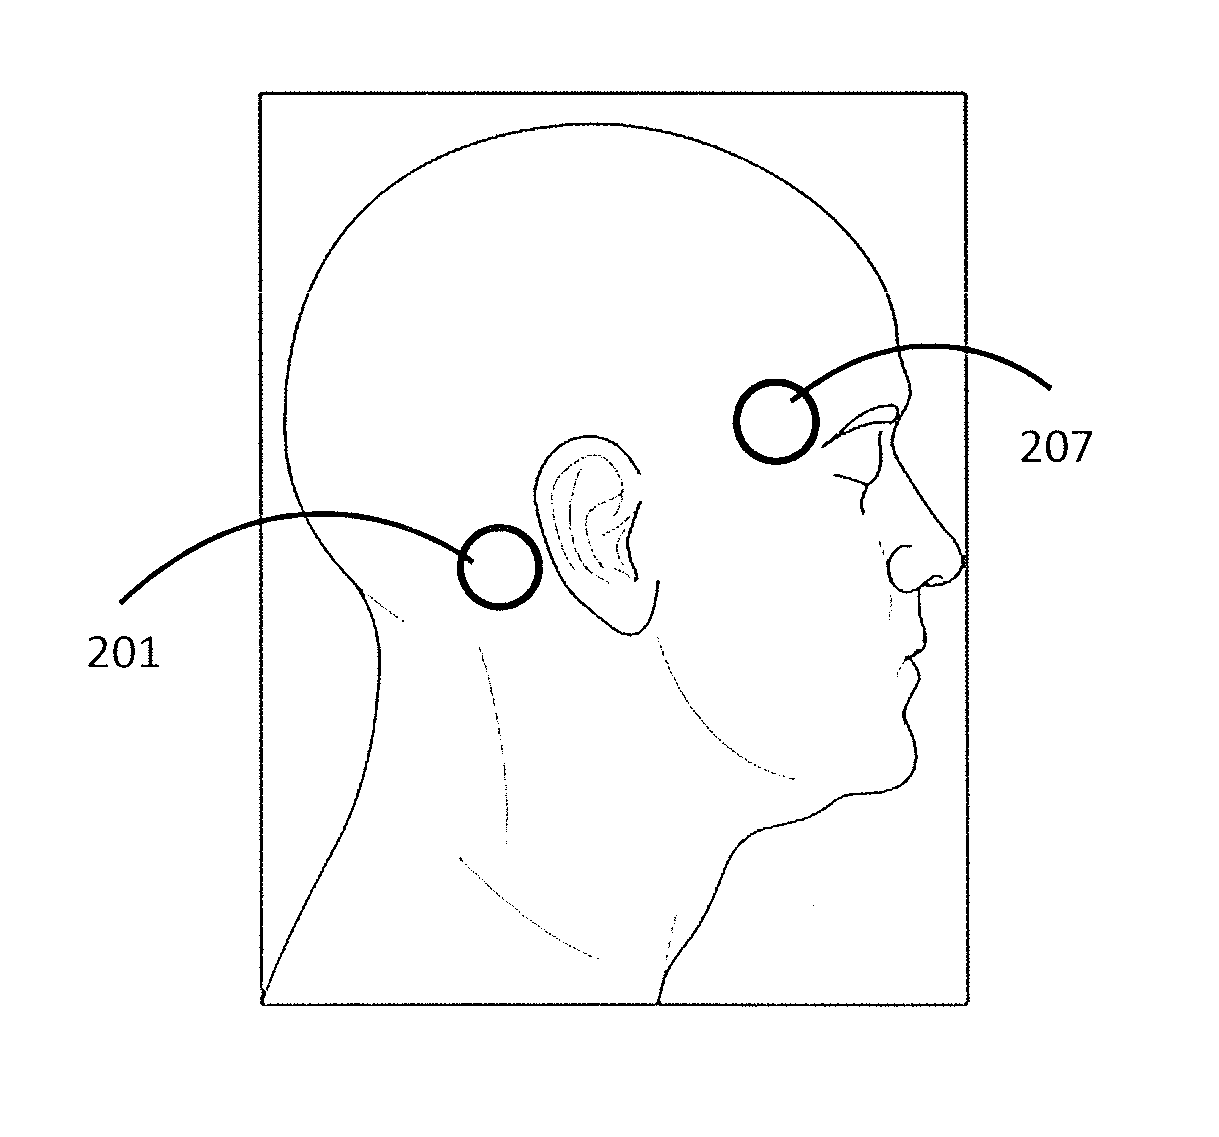 Apparatuses and methods for transdermal electrical stimulation of nerves to modify or induce a cognitive state